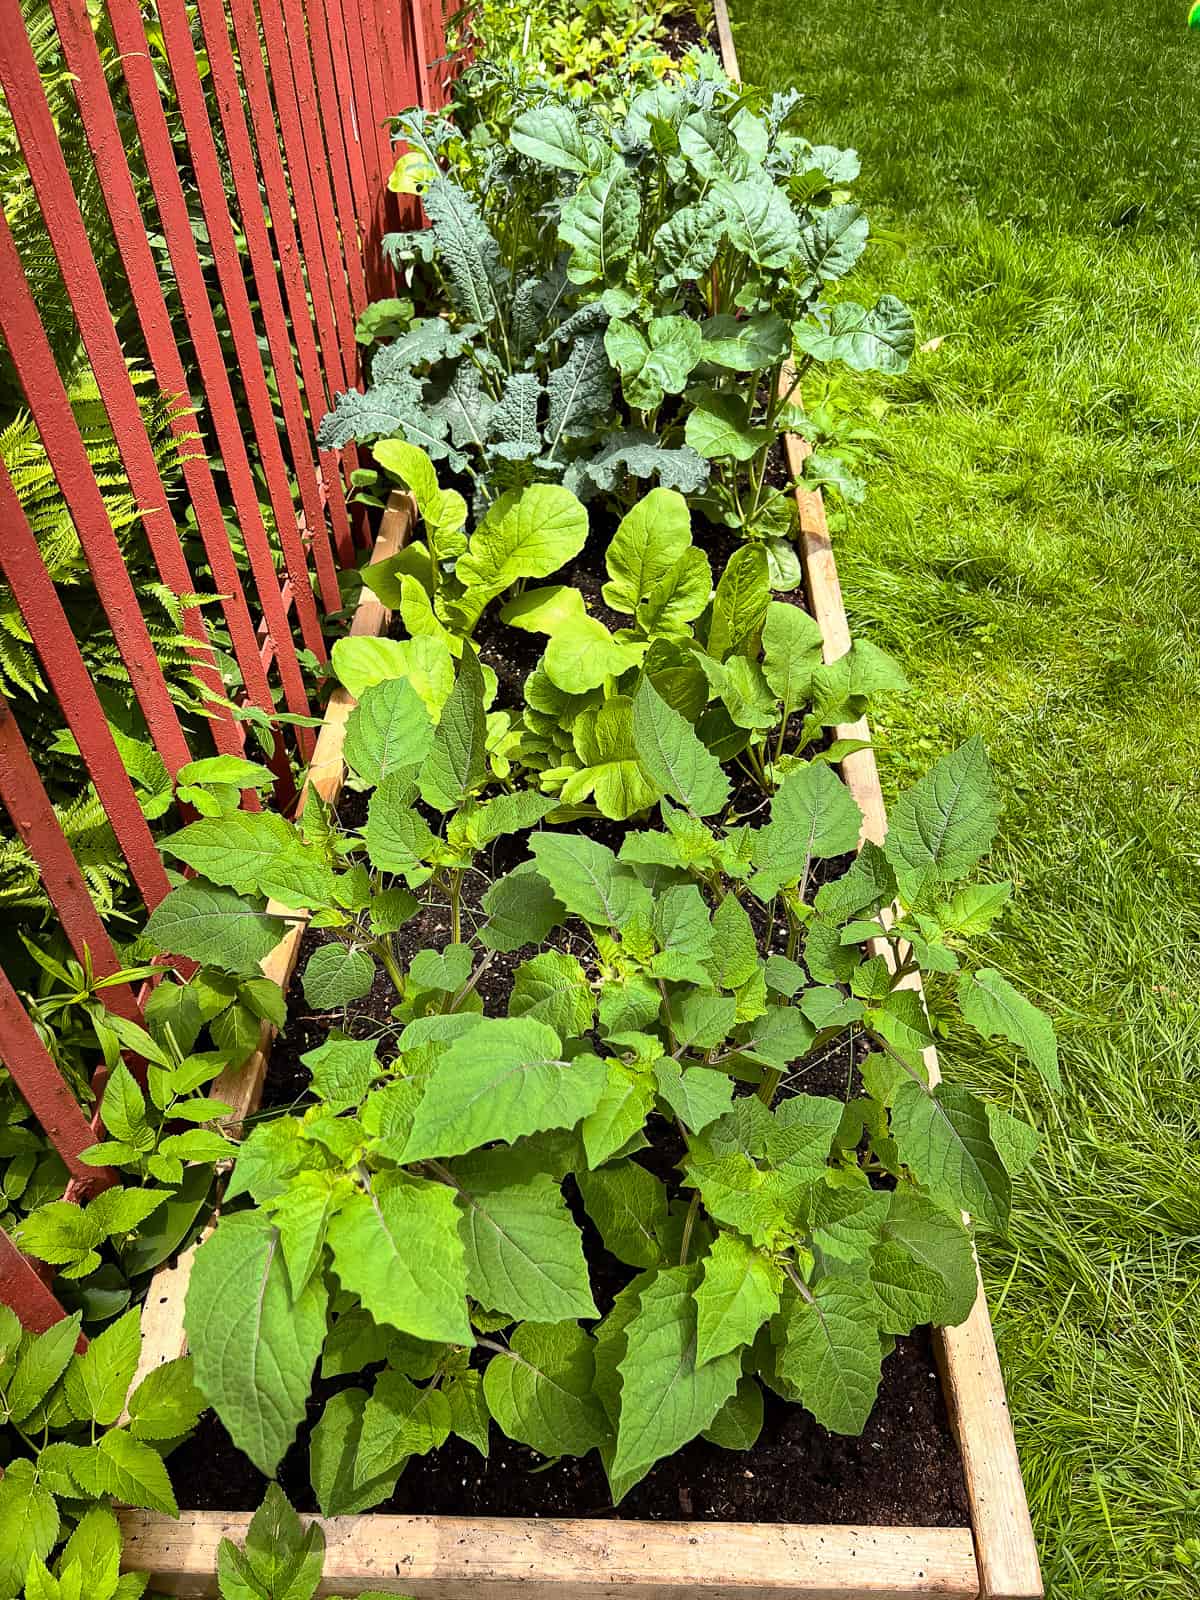 An image of a Square Foot Garden, filled with edible plants.